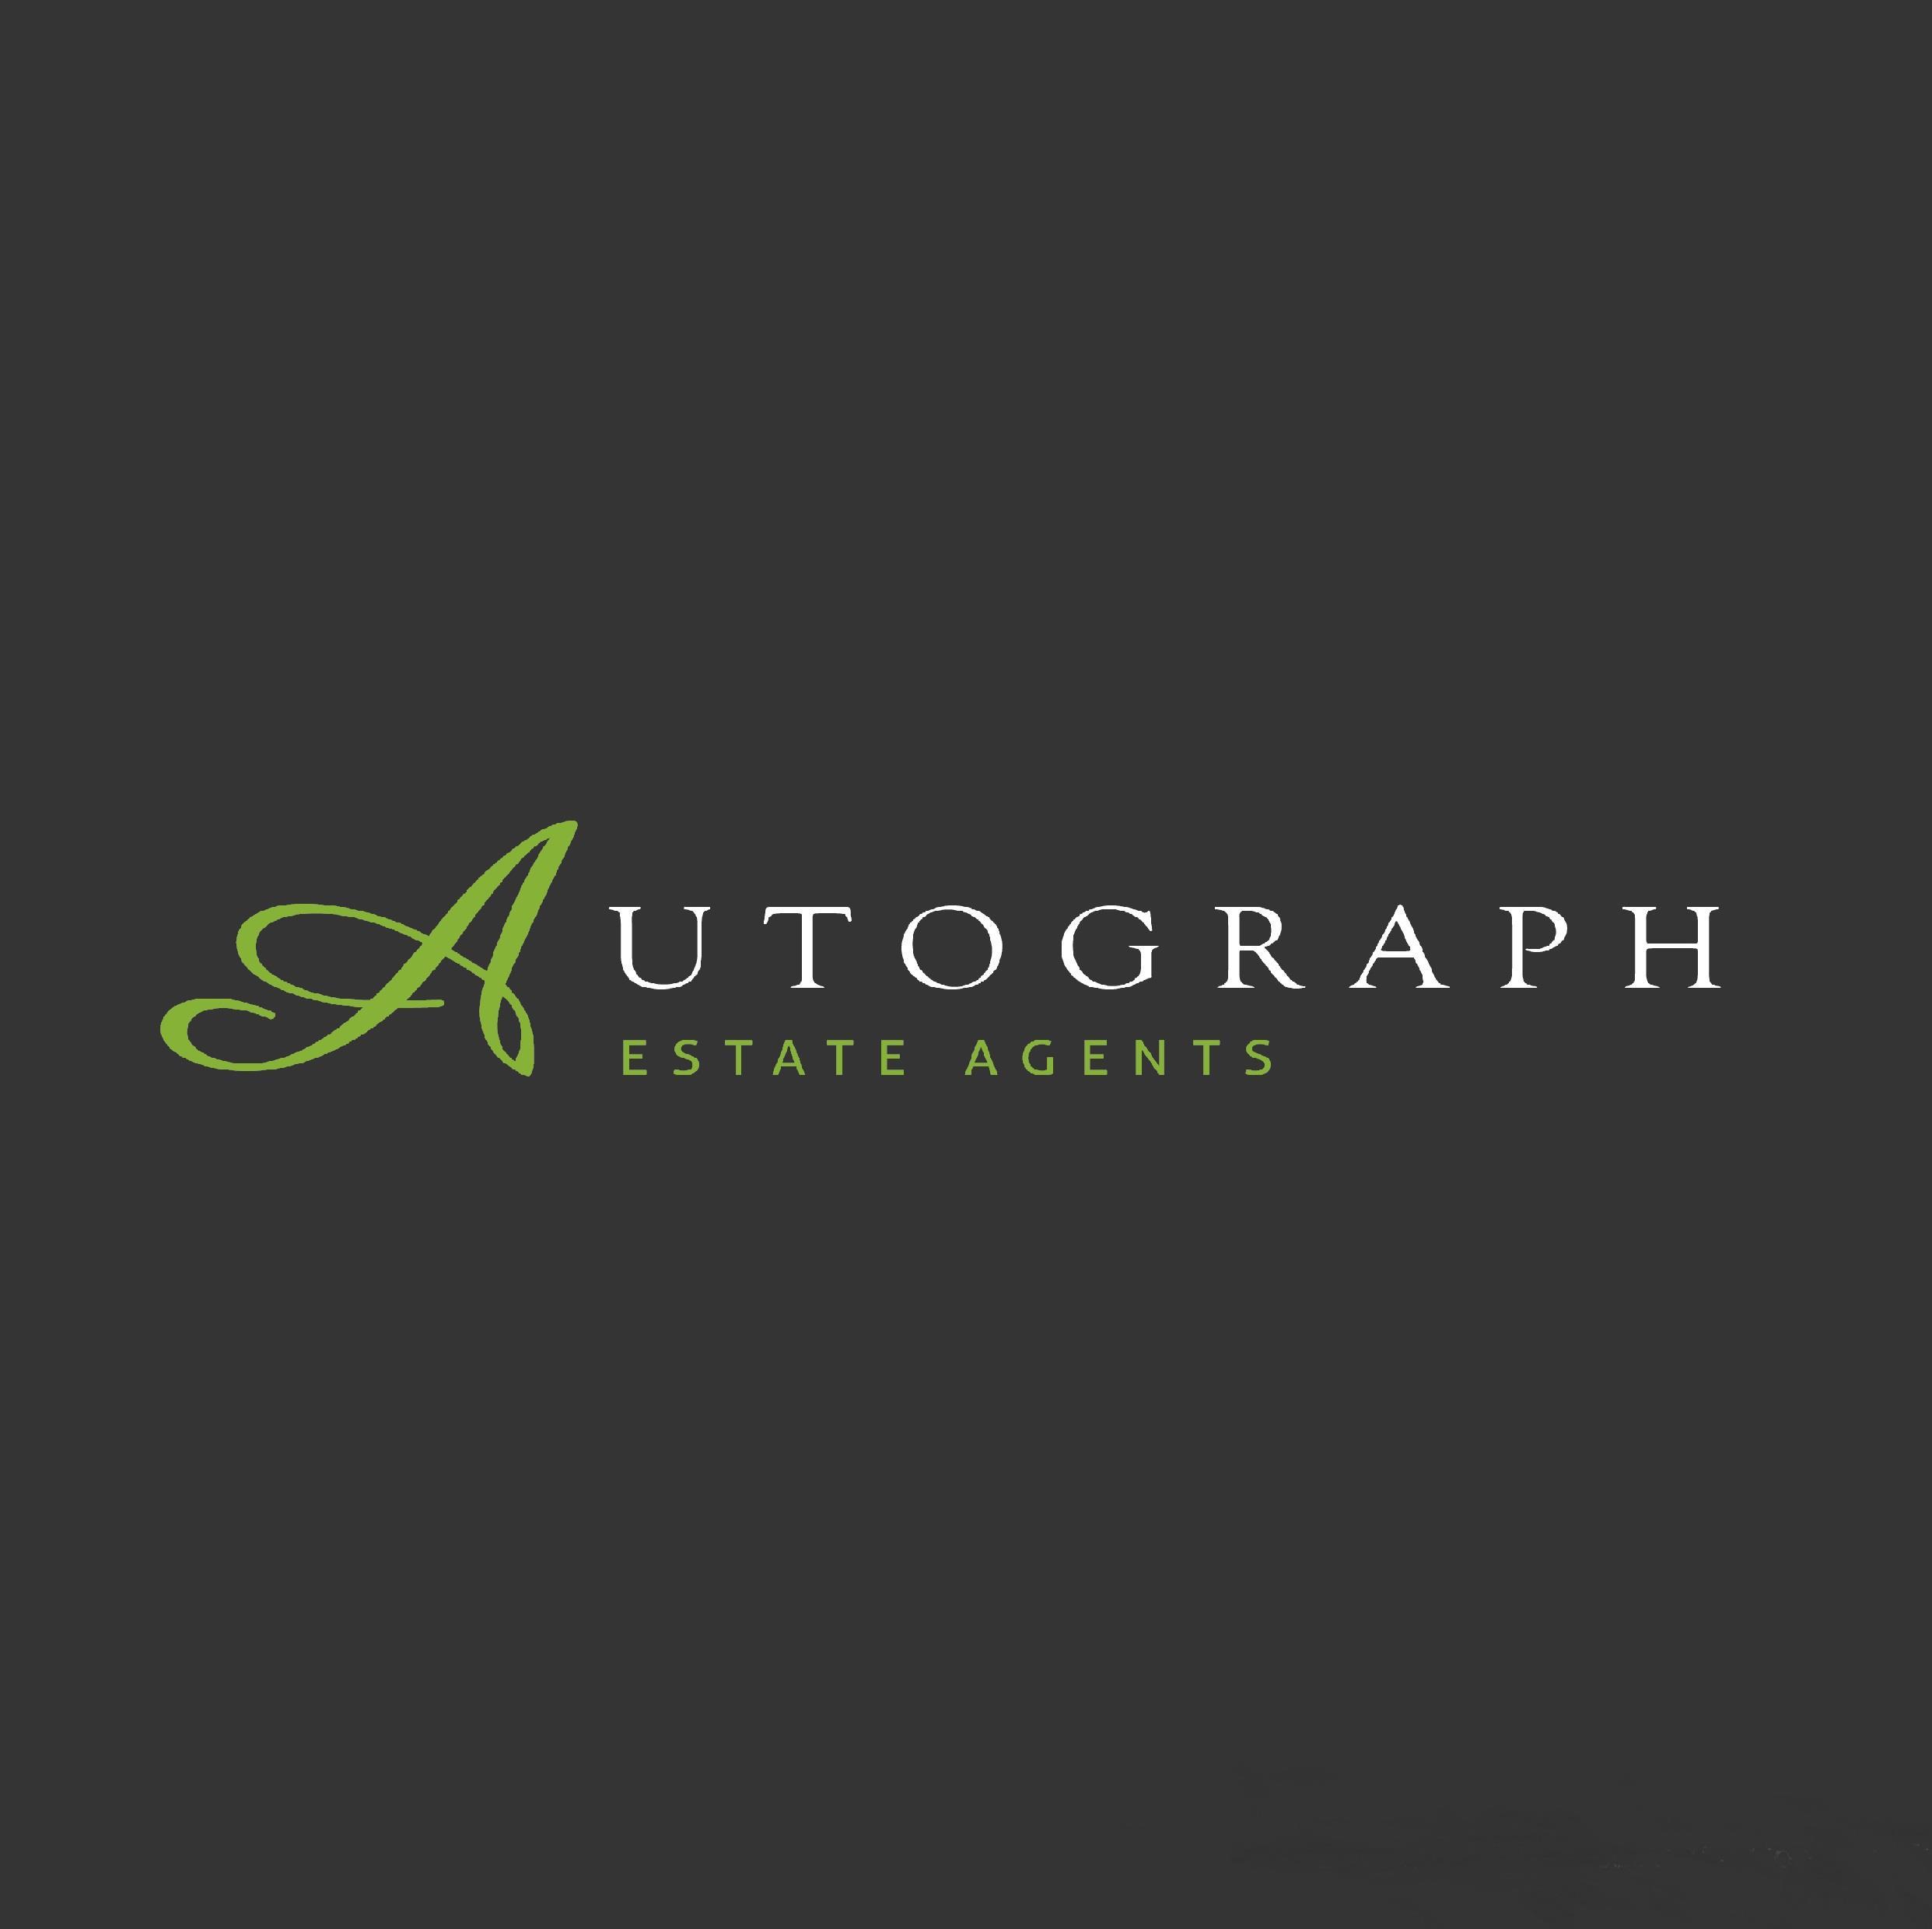 Autograph Estate Agents covering Teignbridge and Exeter! High quality photography and property presentation. Proactive team offering a friendly service.